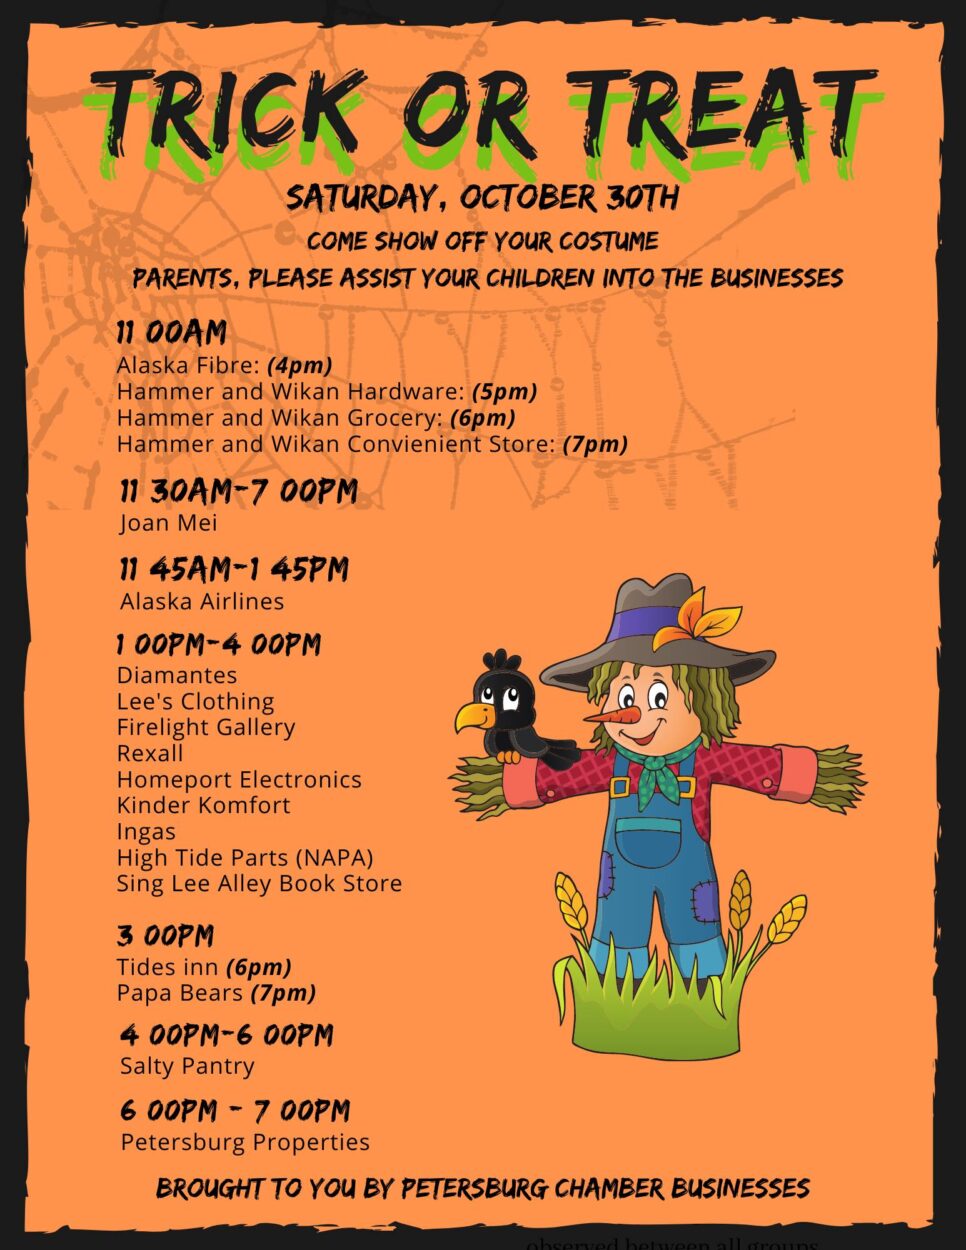 Halloween activities are planned for this weekendhere are some tips KFSK